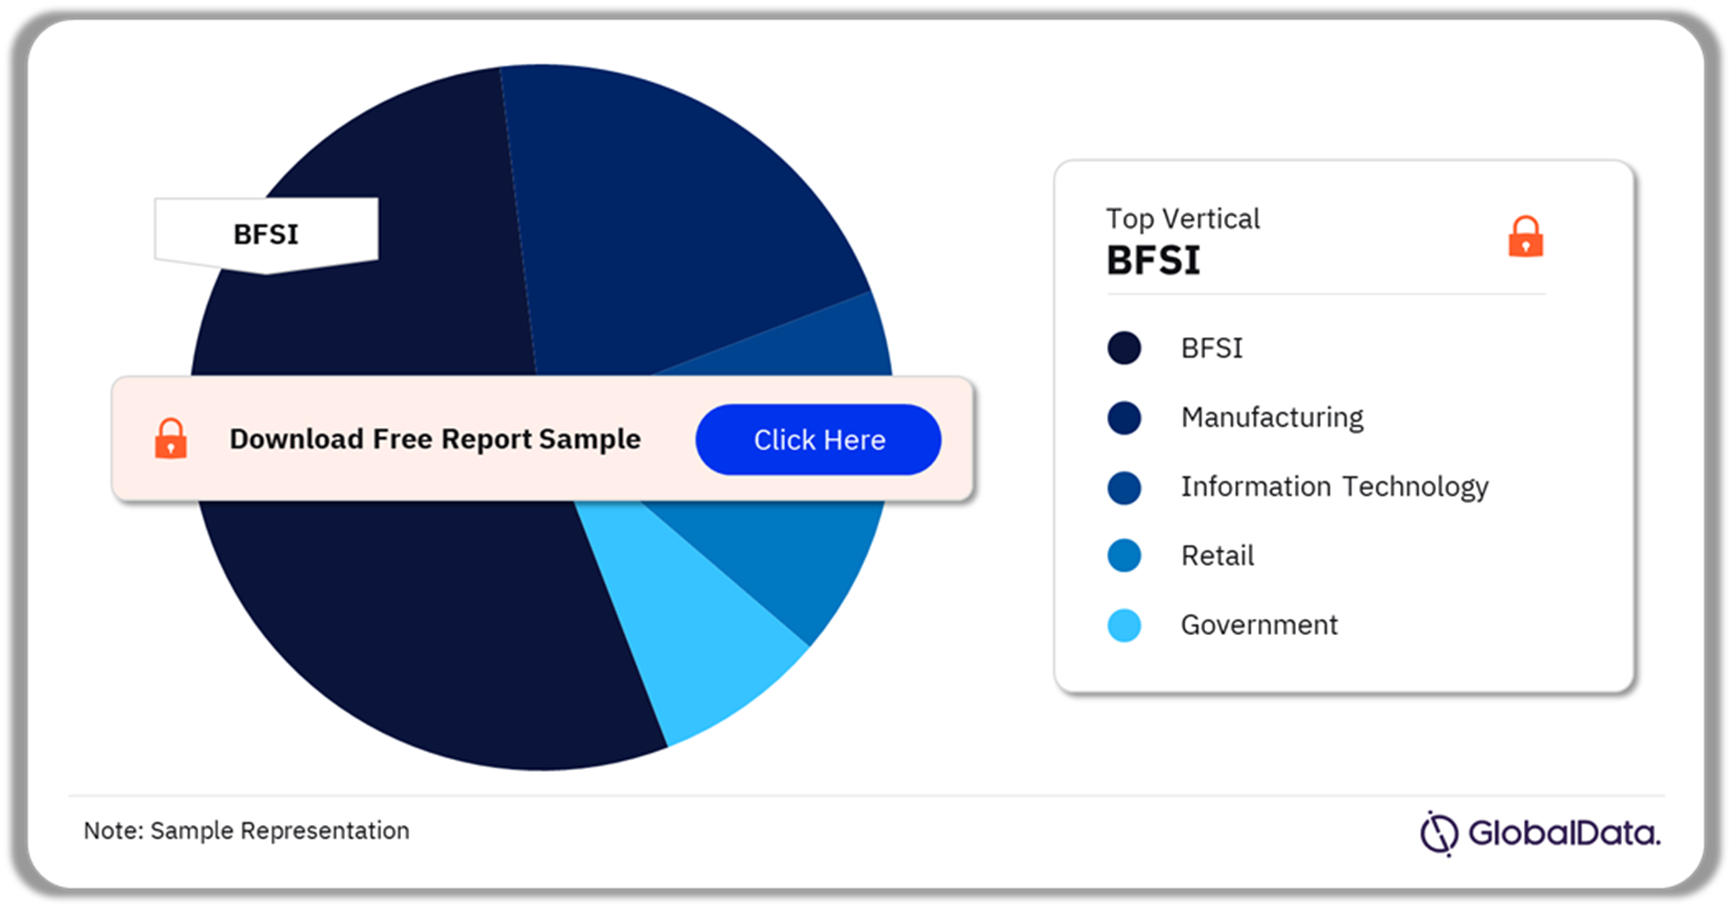 Data and Analytics Market Share by Vertical, 2023 (%)